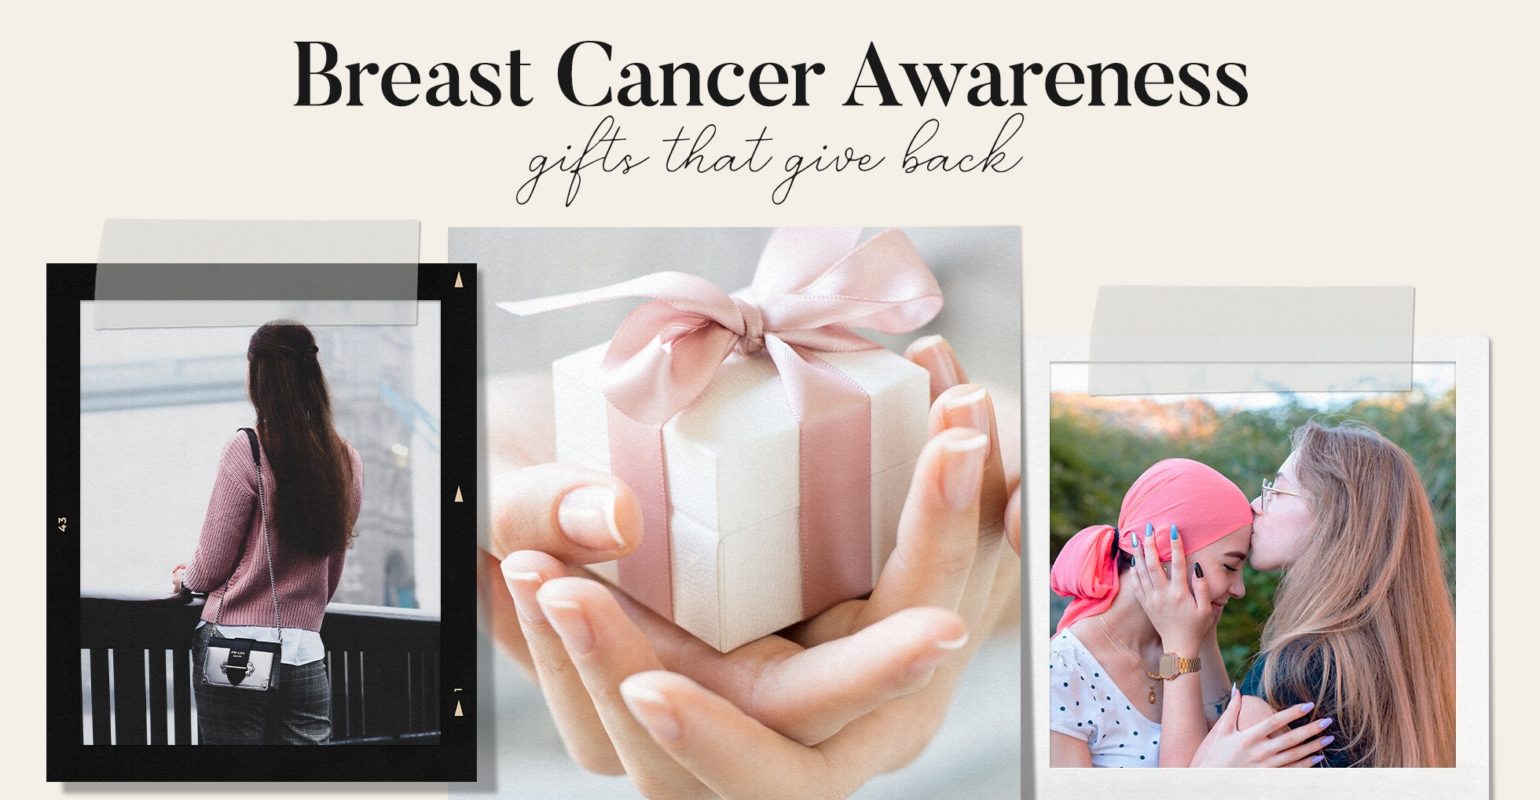 Breast Cancer Gifts That Give Back